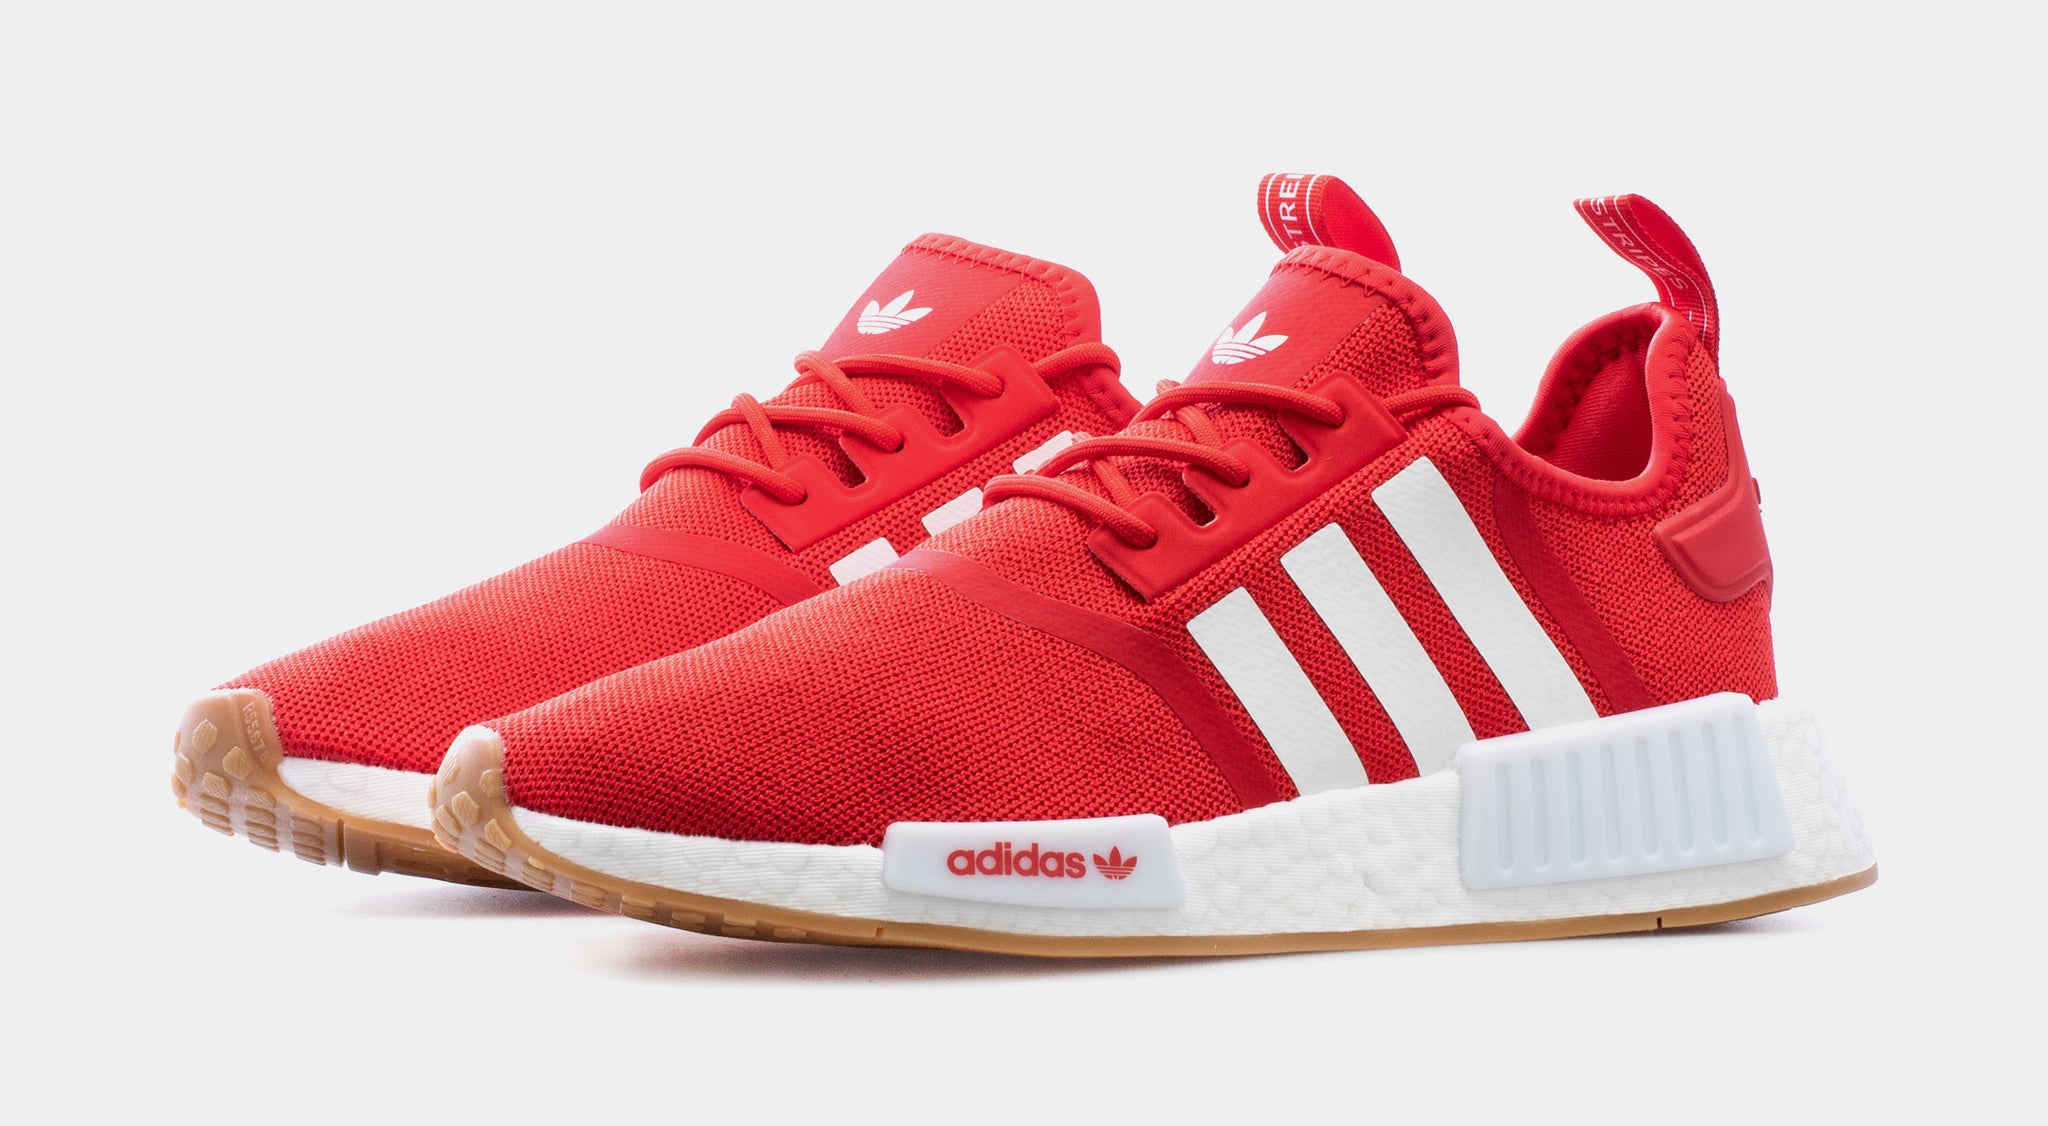 adidas NMD R1 Mens Lifestyle Shoes Red GY6056 – Shoe Palace